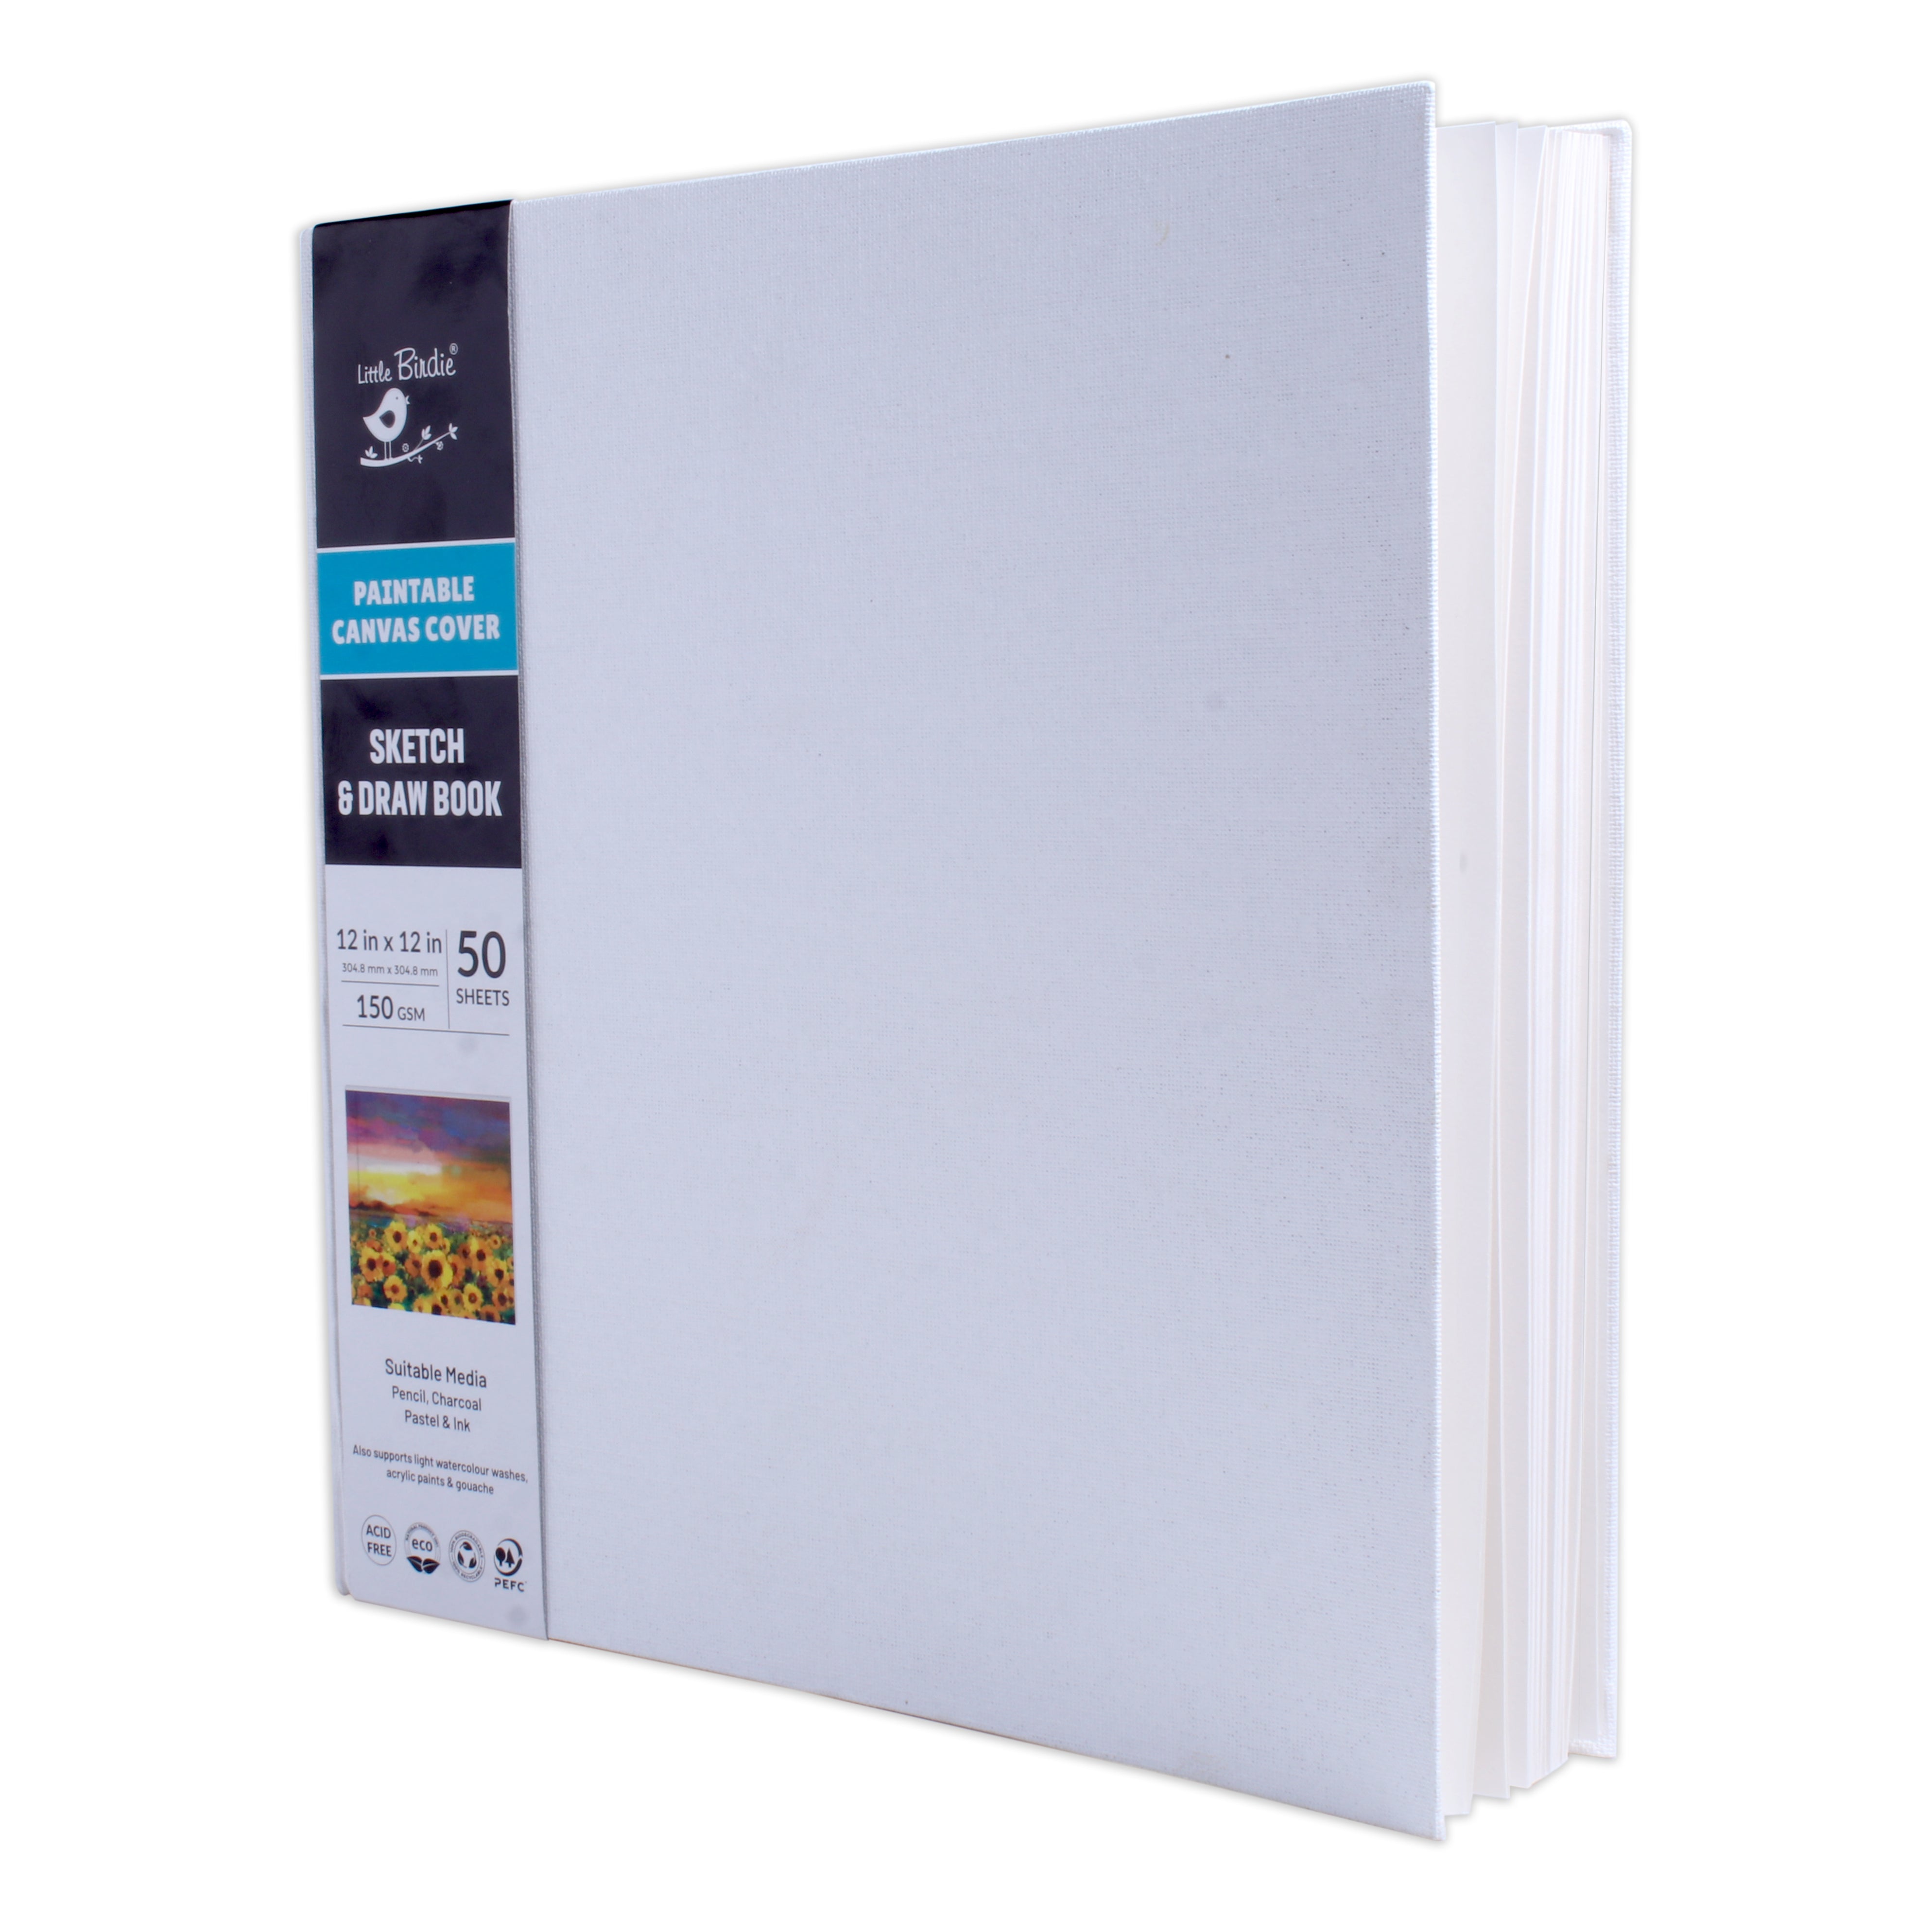 Paintable Canvas Hard Bound Sketch And Drawing Landscape 12X12 150gsm 50 Plain Sheets